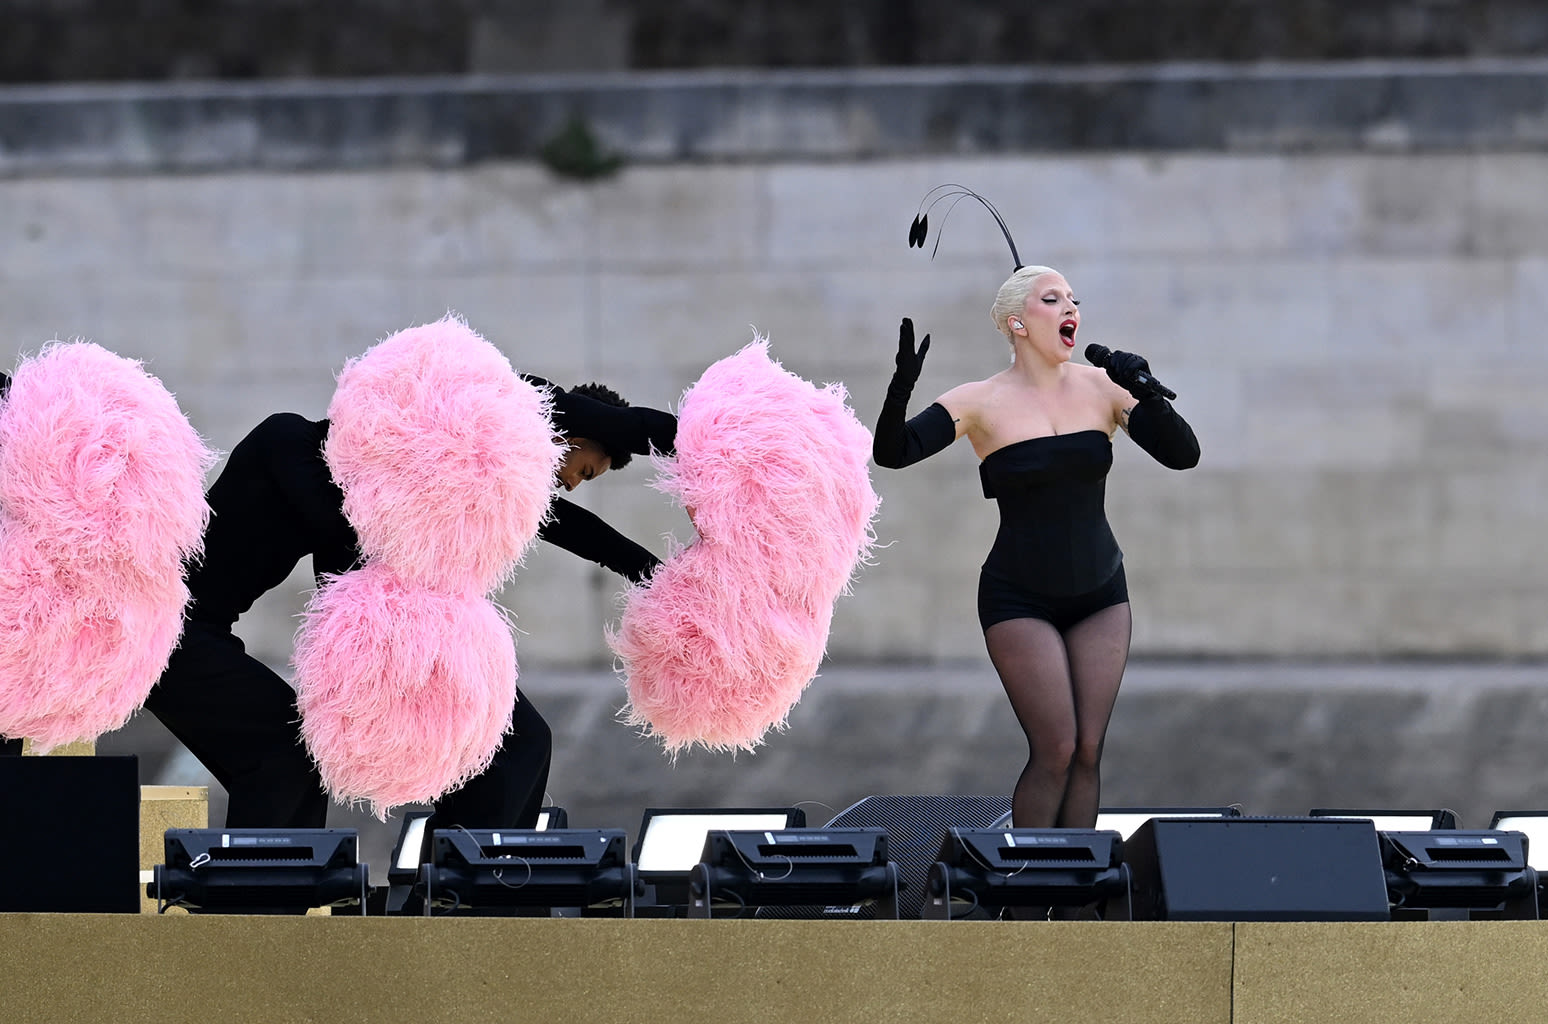 Lady Gaga’s Olympics Opening Ceremony Choreographer Says Performance Was Almost Called Off Due to Rain